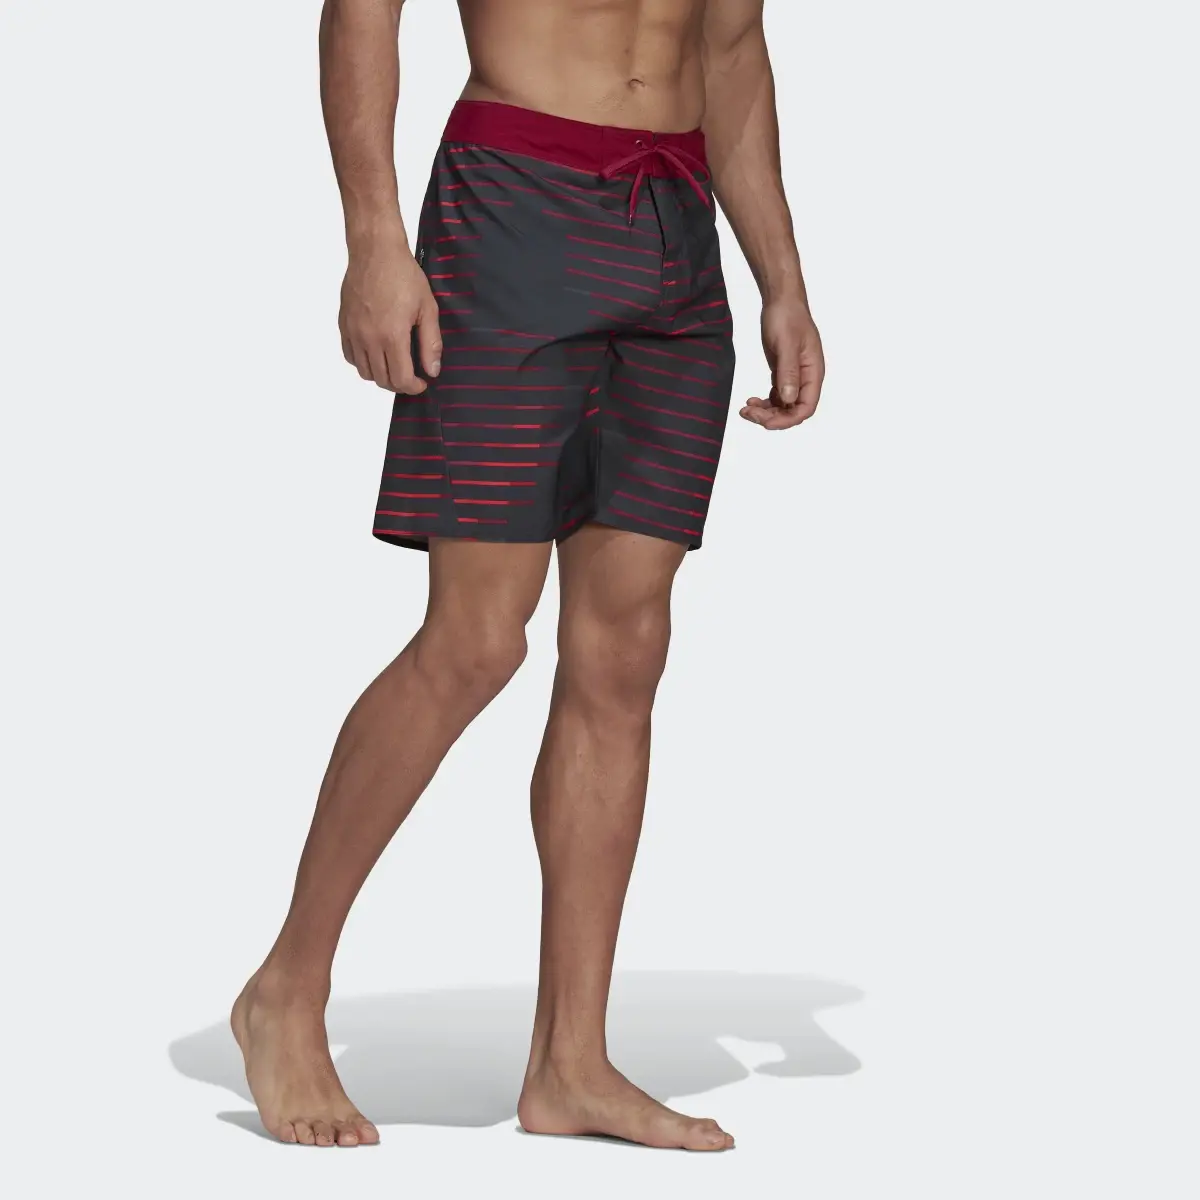 Adidas Classic Length Melbourne Graphic Board Shorts. 3